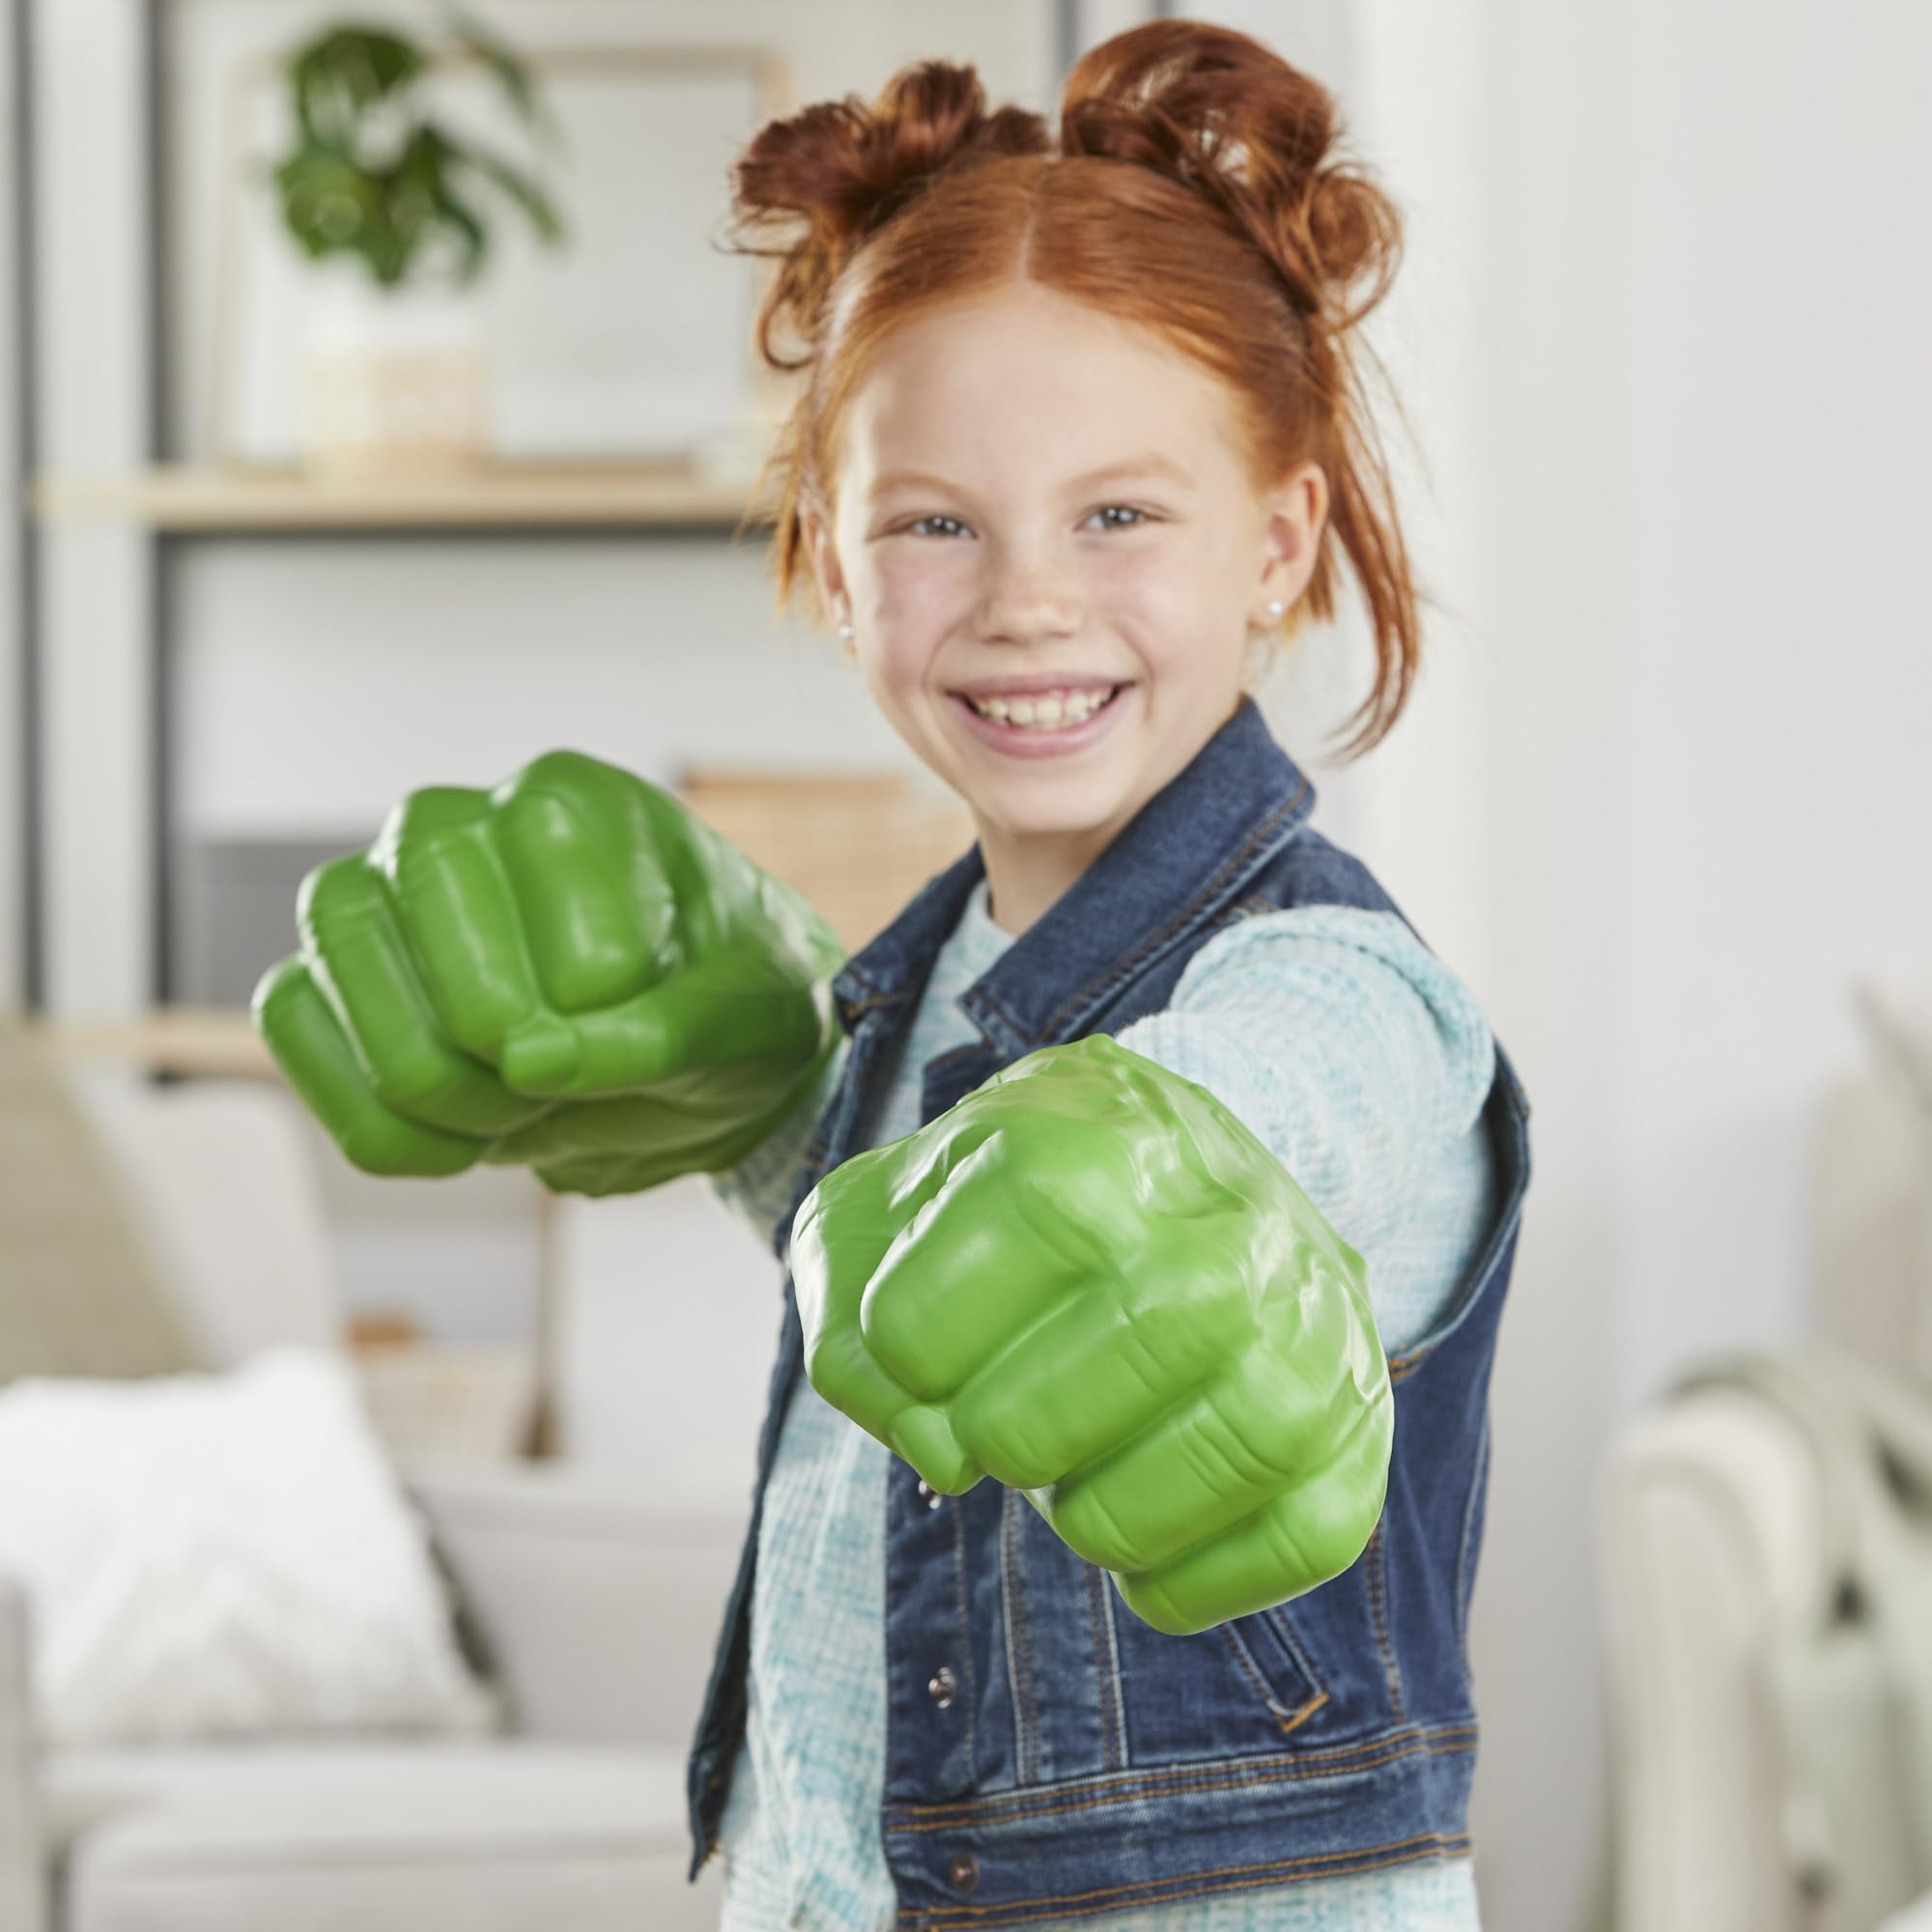 Marvel Hulk Gamma Smash Fists, Soft Foam Role Play Toy, Avengers Super Hero Toys for Kids Ages 5 and Up